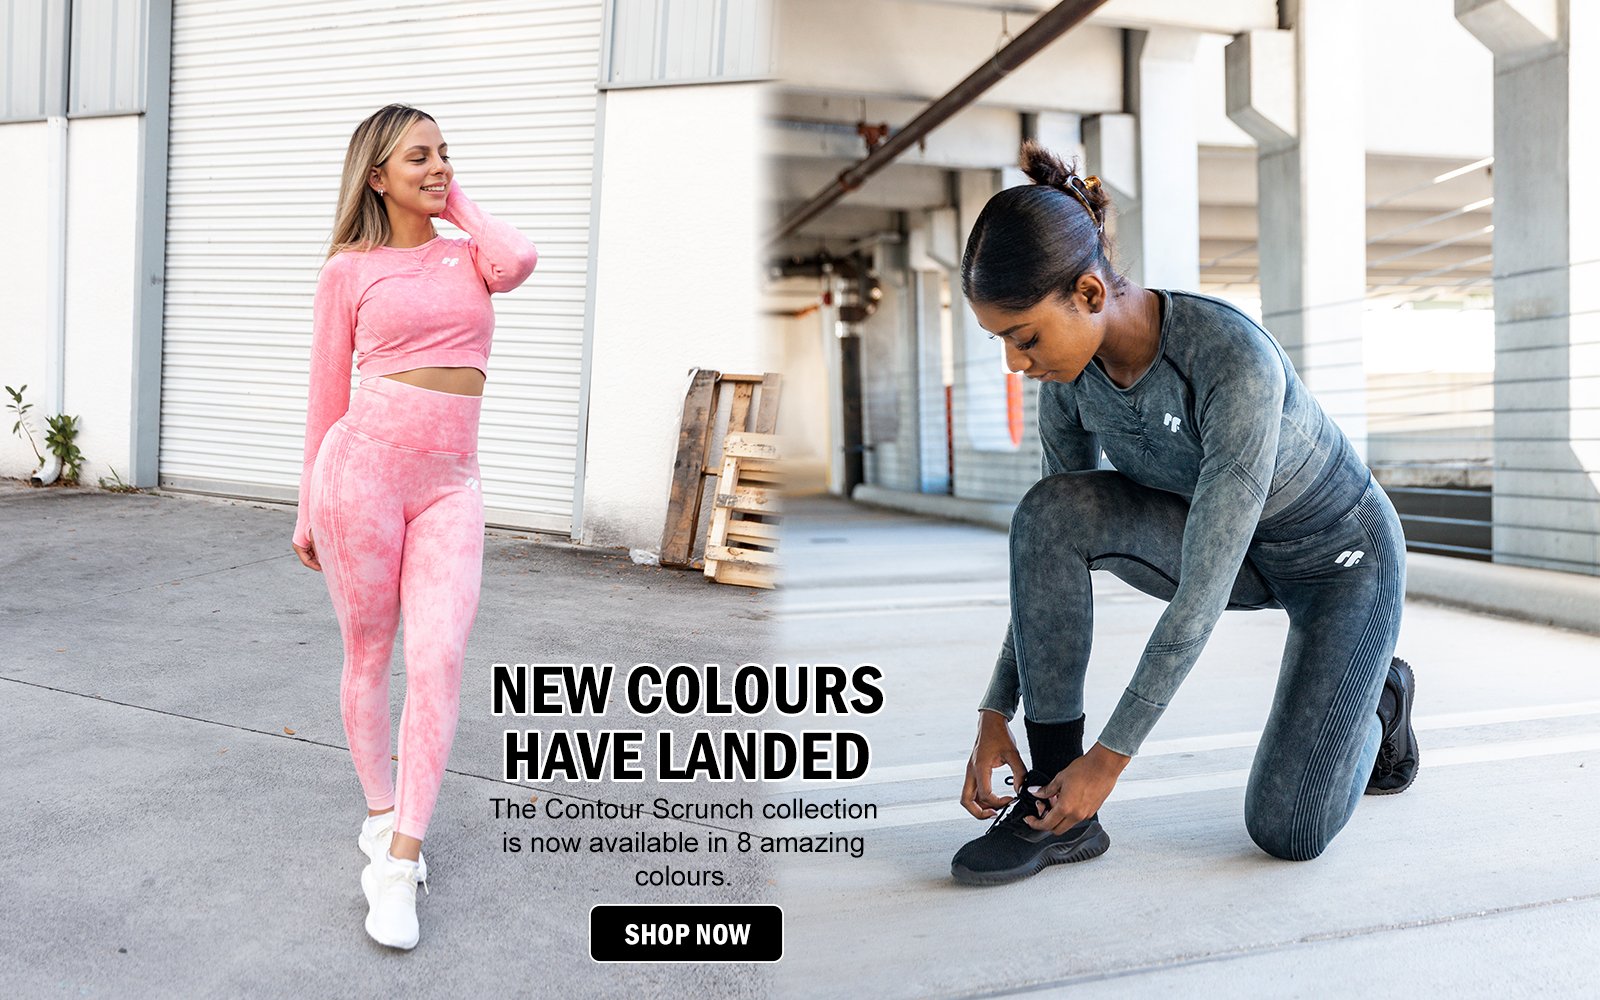 Activewear Sets » Shop Activewear Outfits